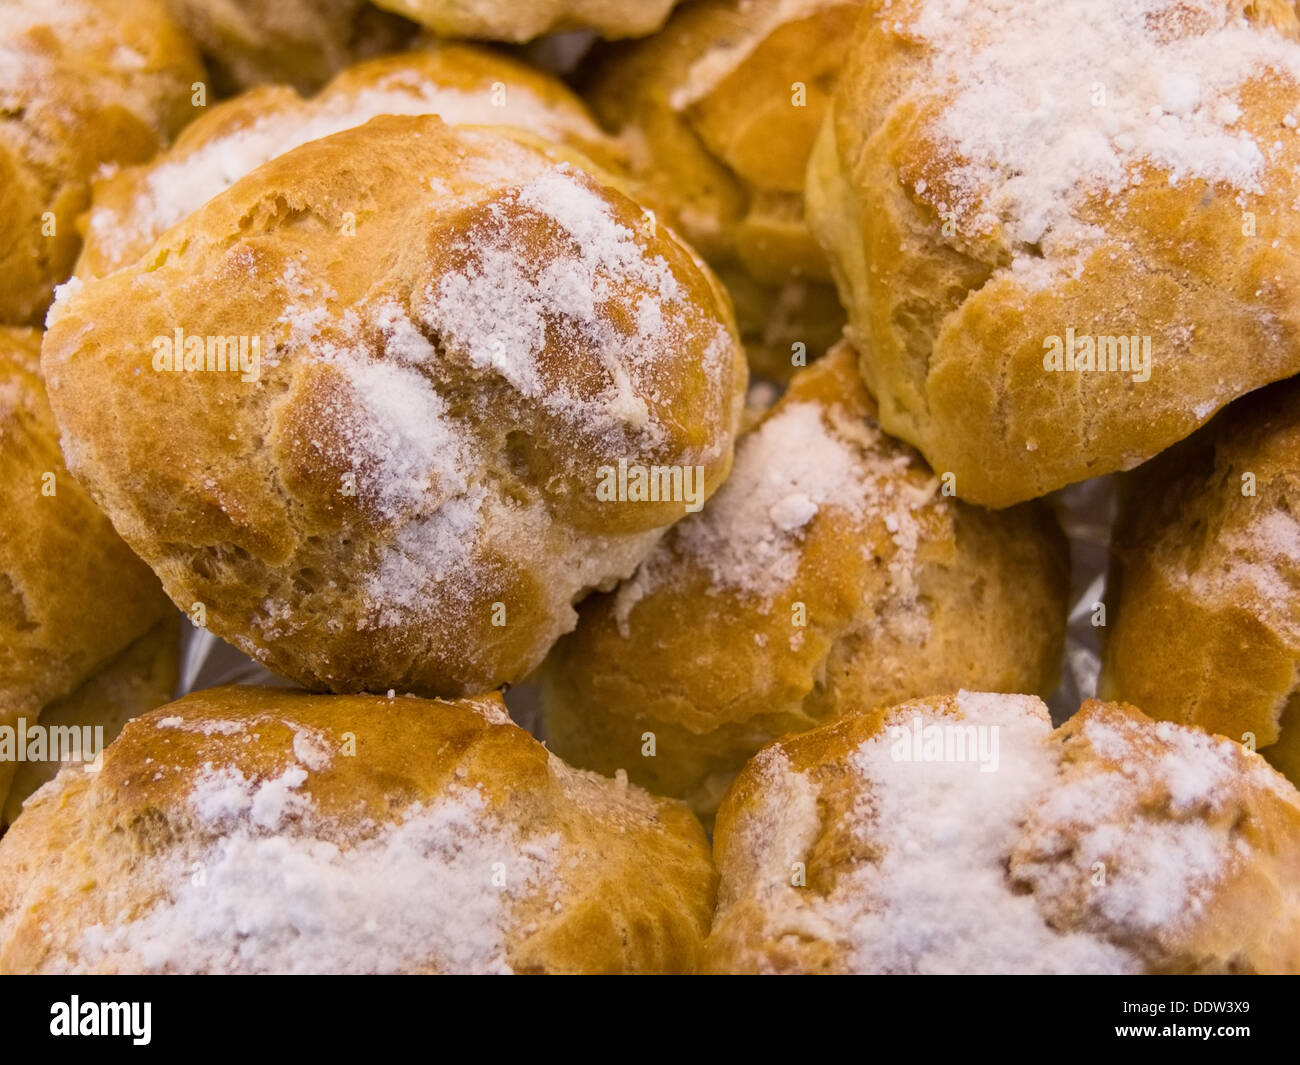 Close-up photo of appetizing pastries filled with custard Stock Photo